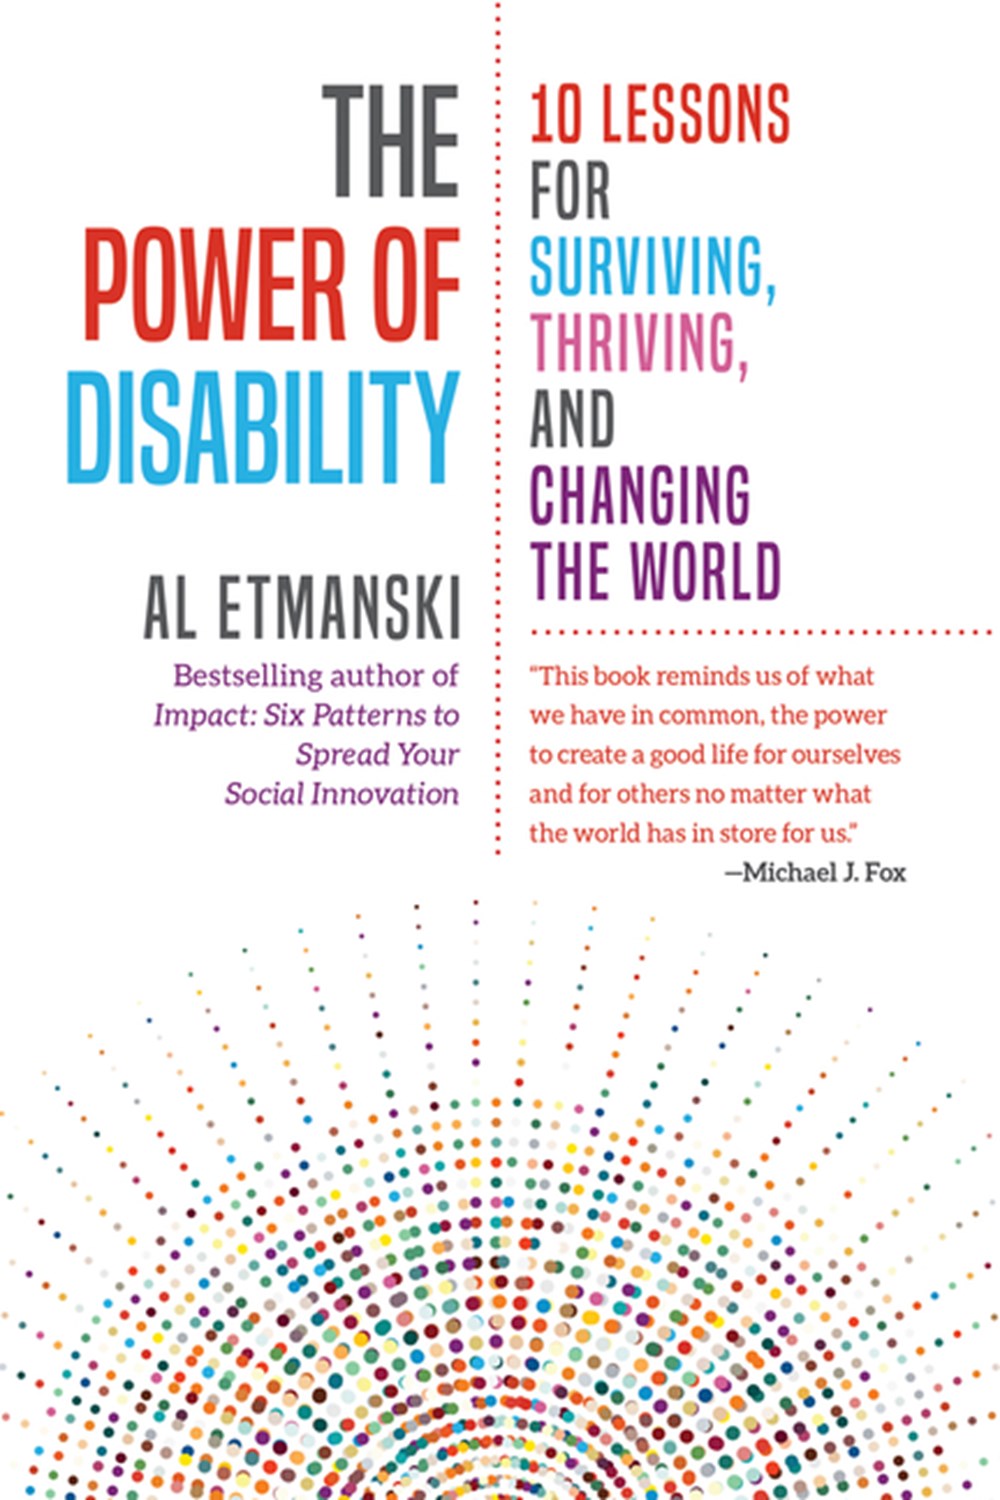 Power of Disability: 10 Lessons for Surviving, Thriving, and Changing the World